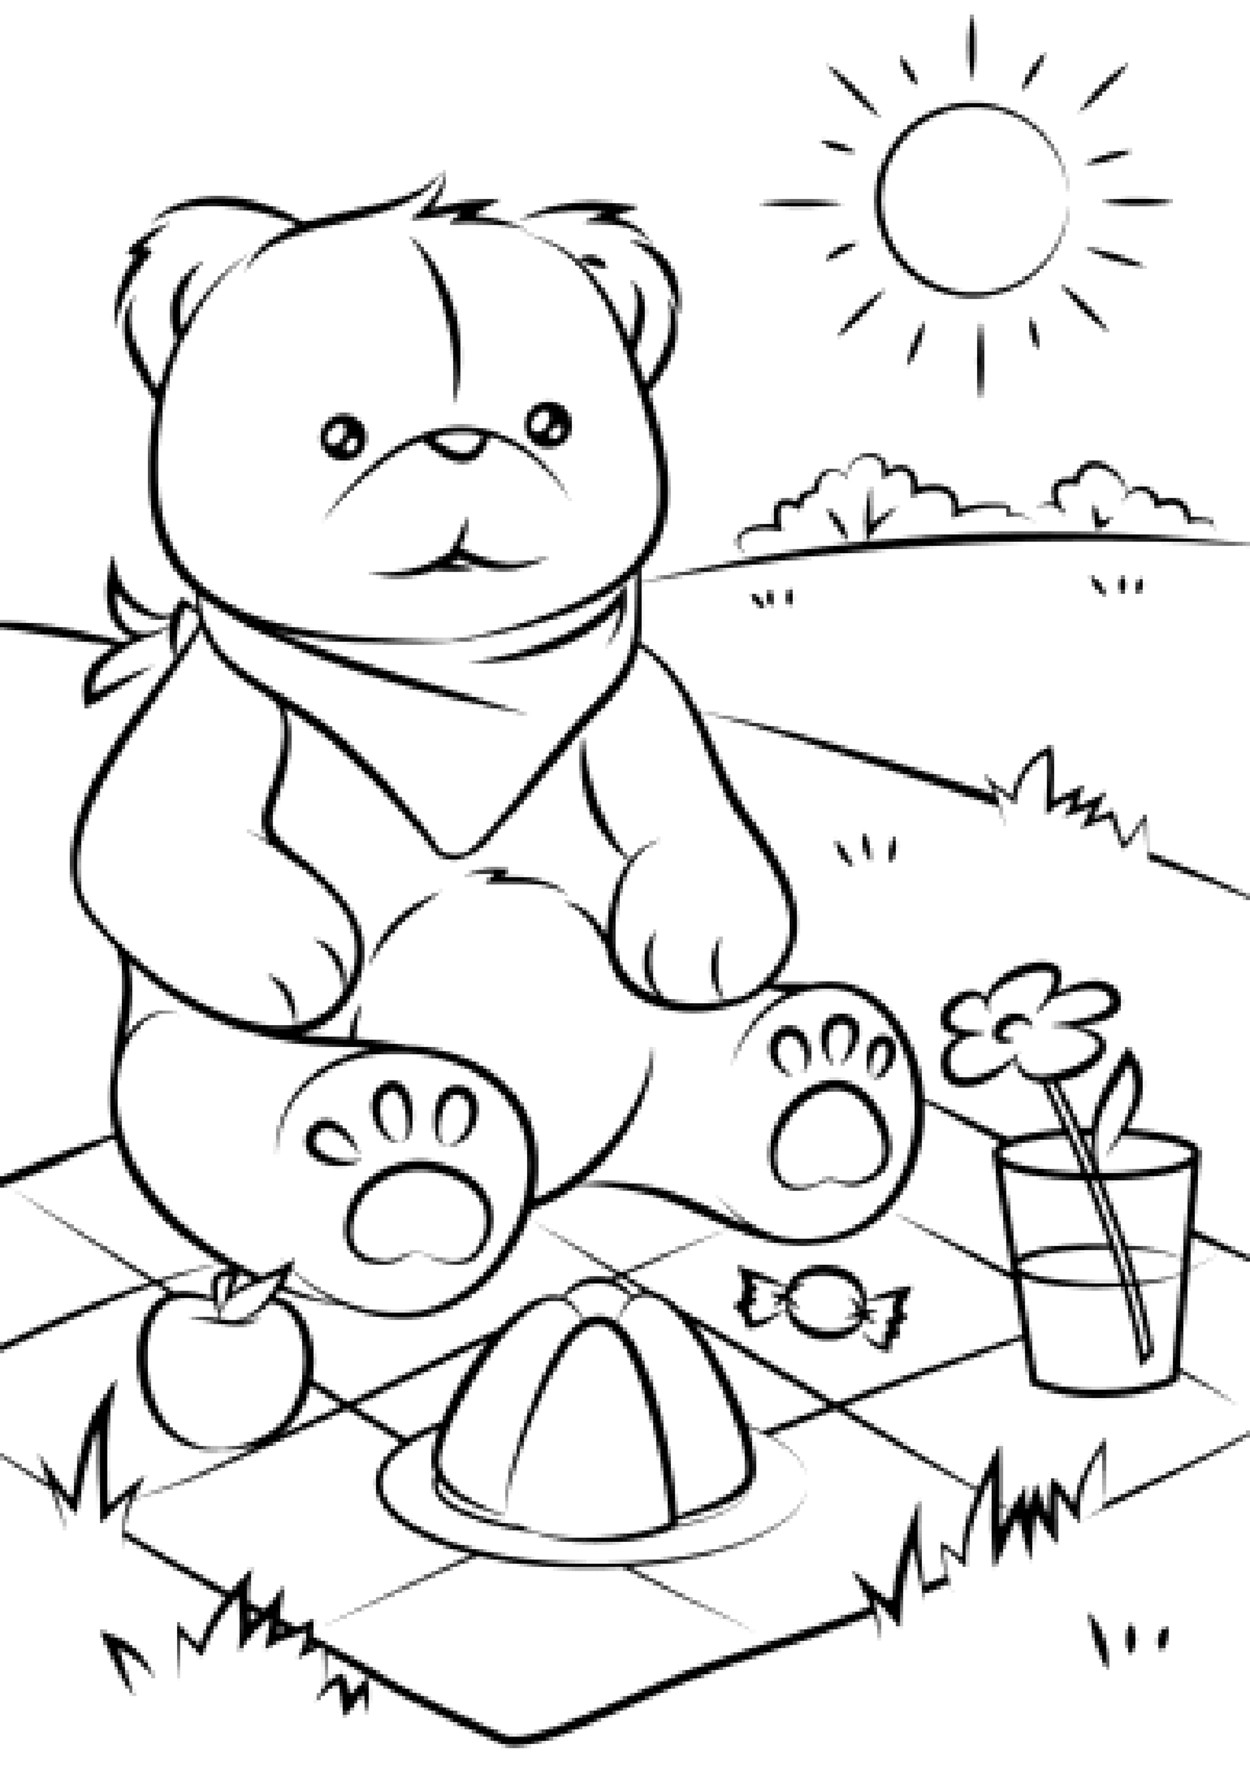 Bear Coloring Pages For Kids
 Bears to Bears Kids Coloring Pages